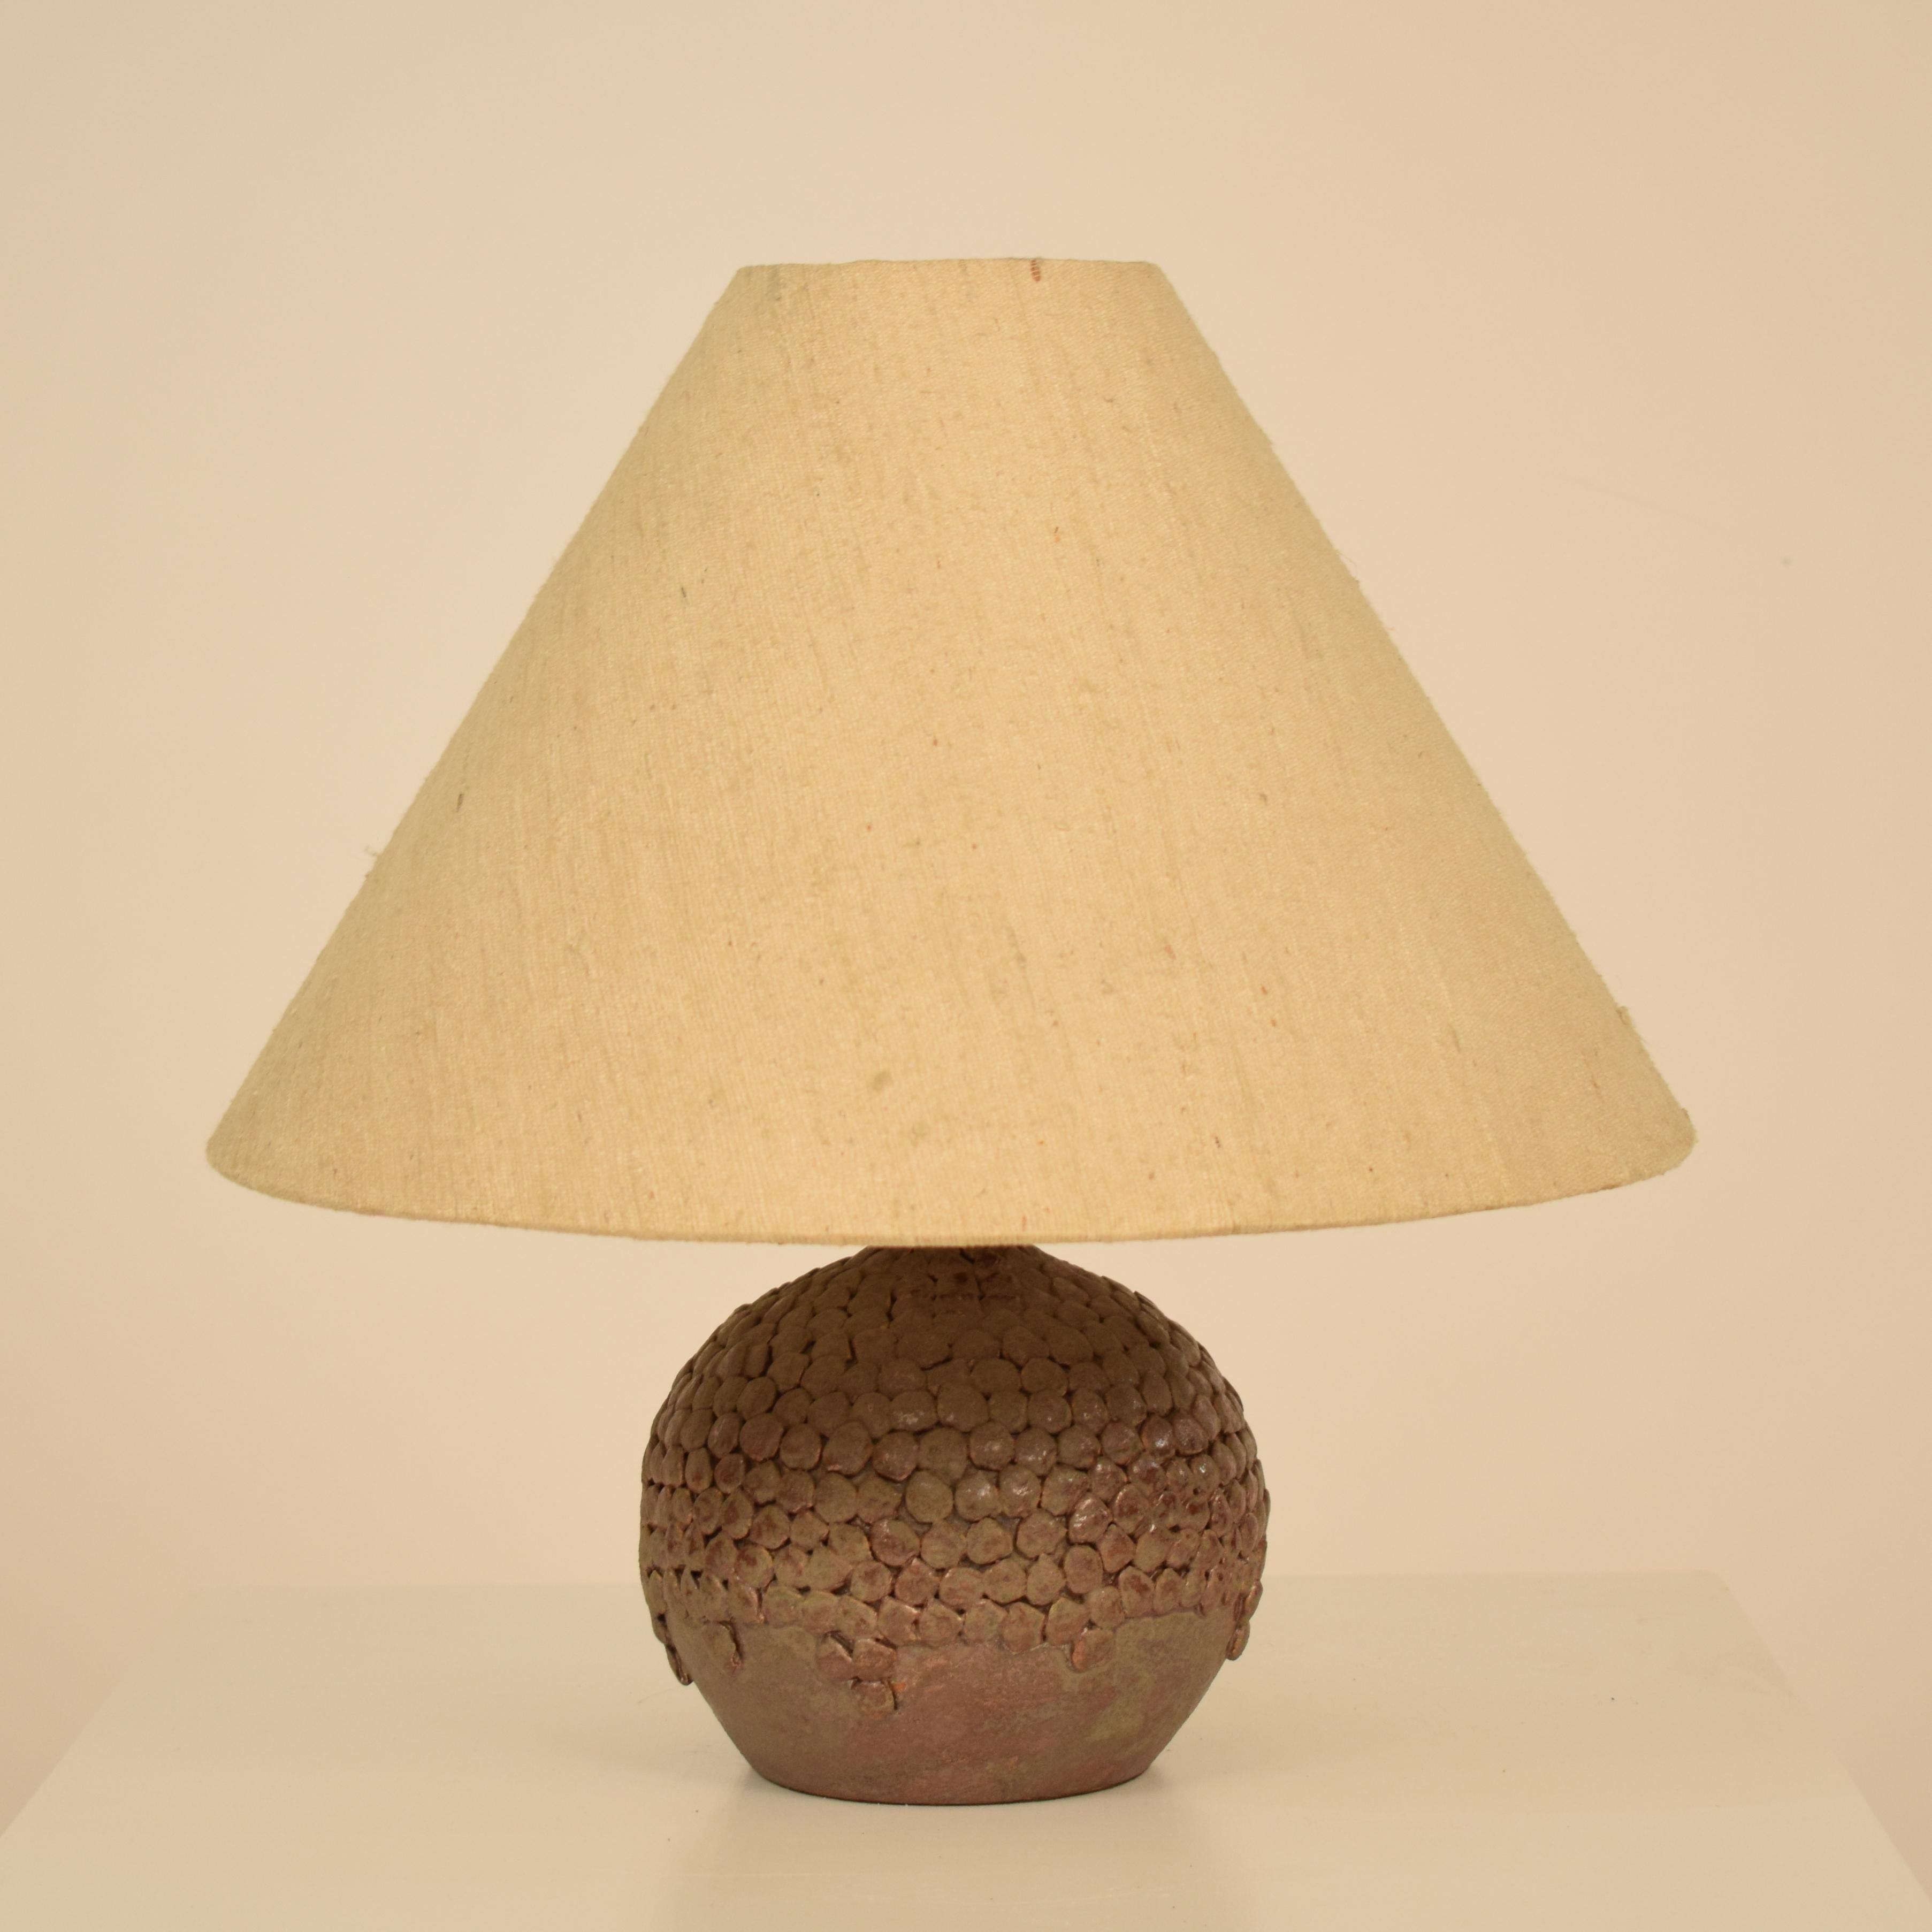 Beautiful midcentury French Wabi Sabi ceramic lamp with beige linen lamp shade, 1960
Great details on the ceramic vase.
The vase is 16cm in height and 16cm in diameter
The lamp shade is 23cm in height and 37cm in diameter.
A unique piece which